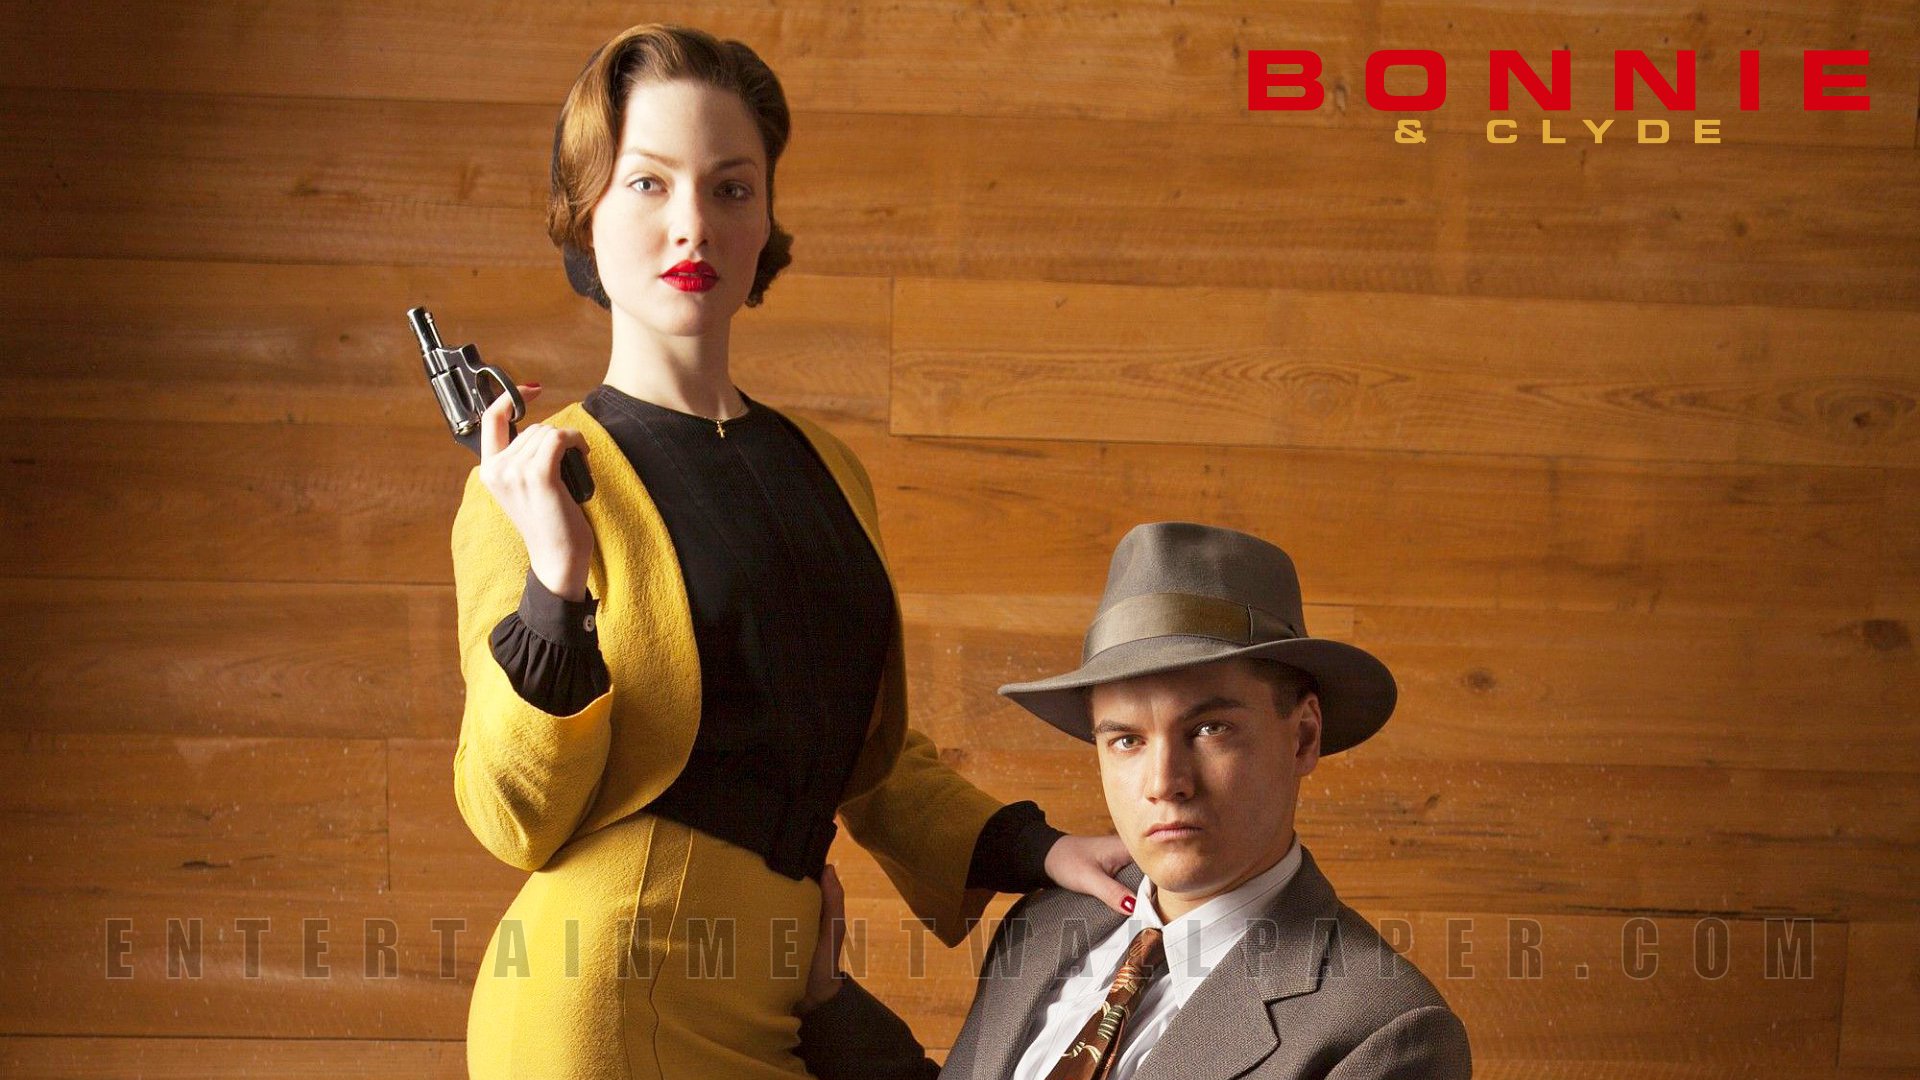 Like Or Share Bonnie And Clyde Wallpaper On